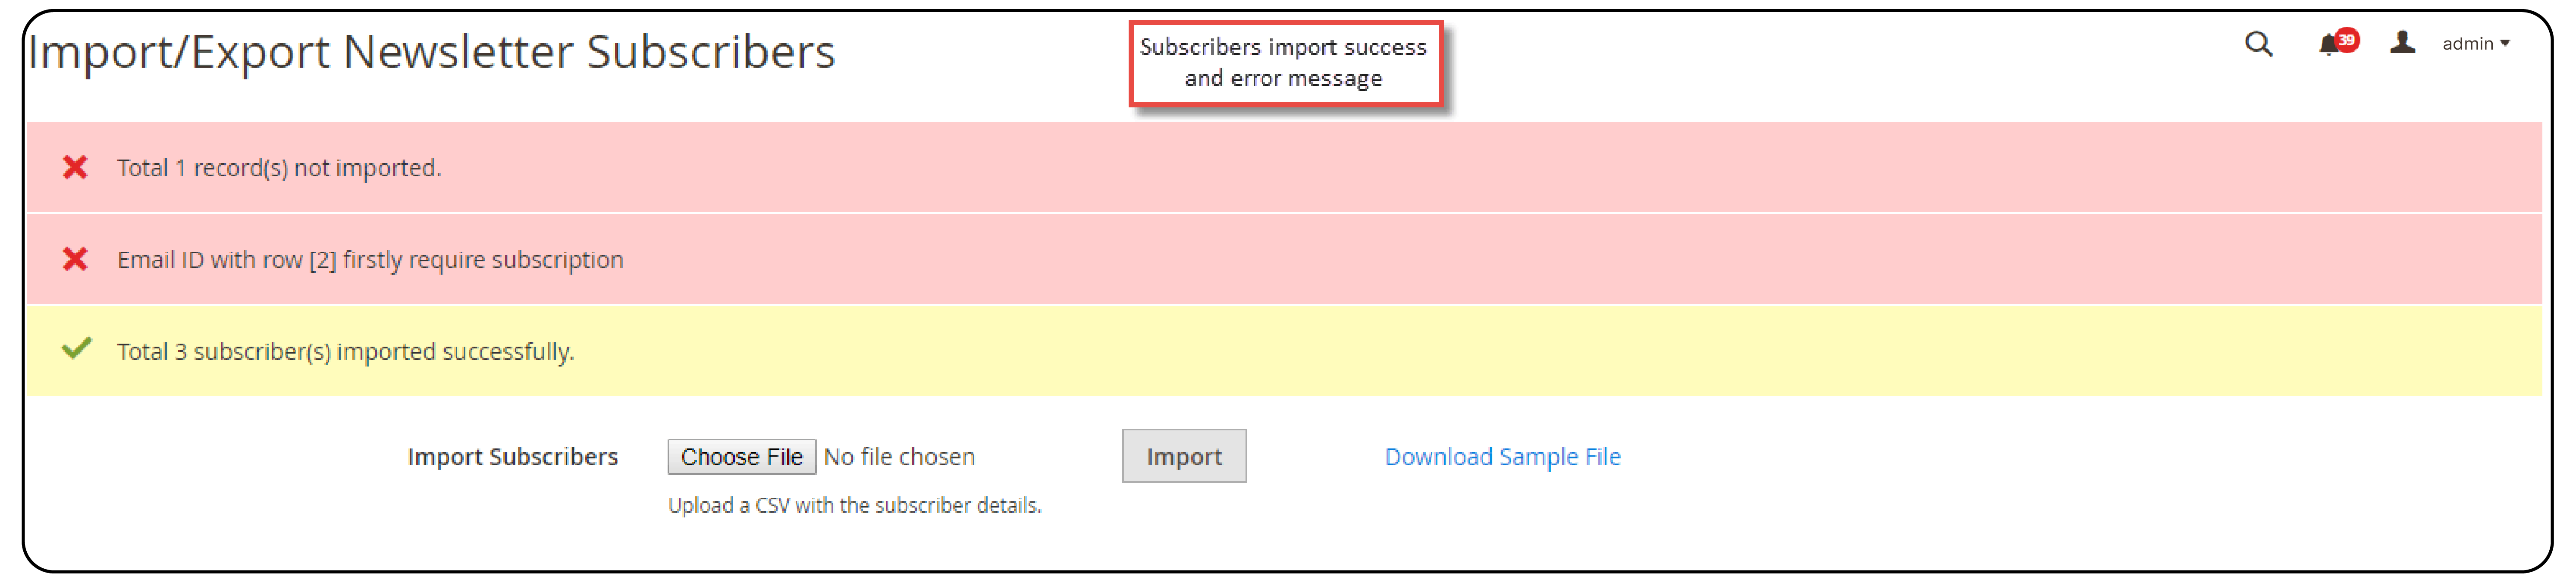 Magento 2 Import Export Newsletter Subscribers Extension status